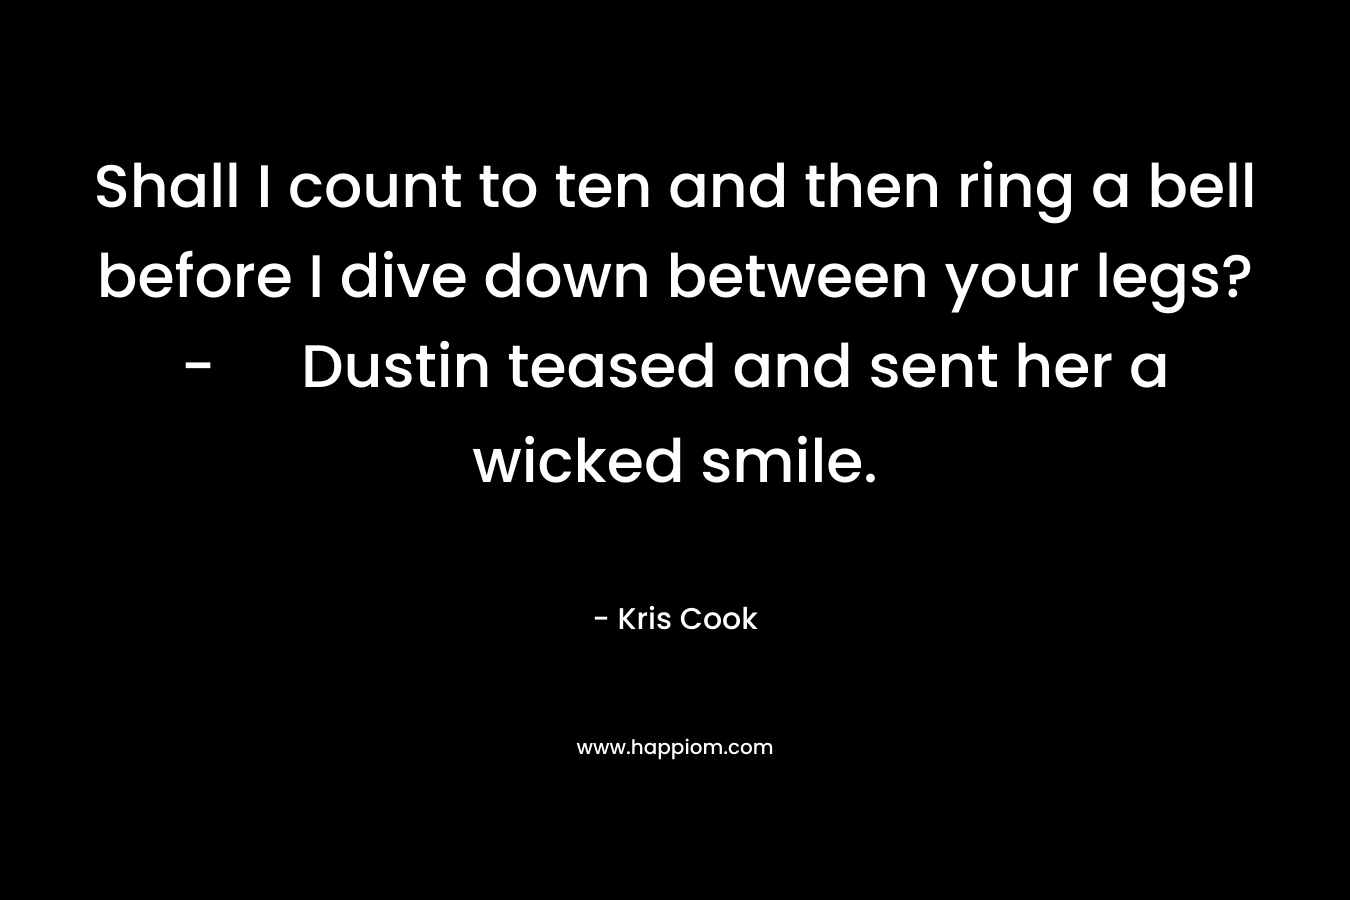 Shall I count to ten and then ring a bell before I dive down between your legs?- Dustin teased and sent her a wicked smile. – Kris Cook